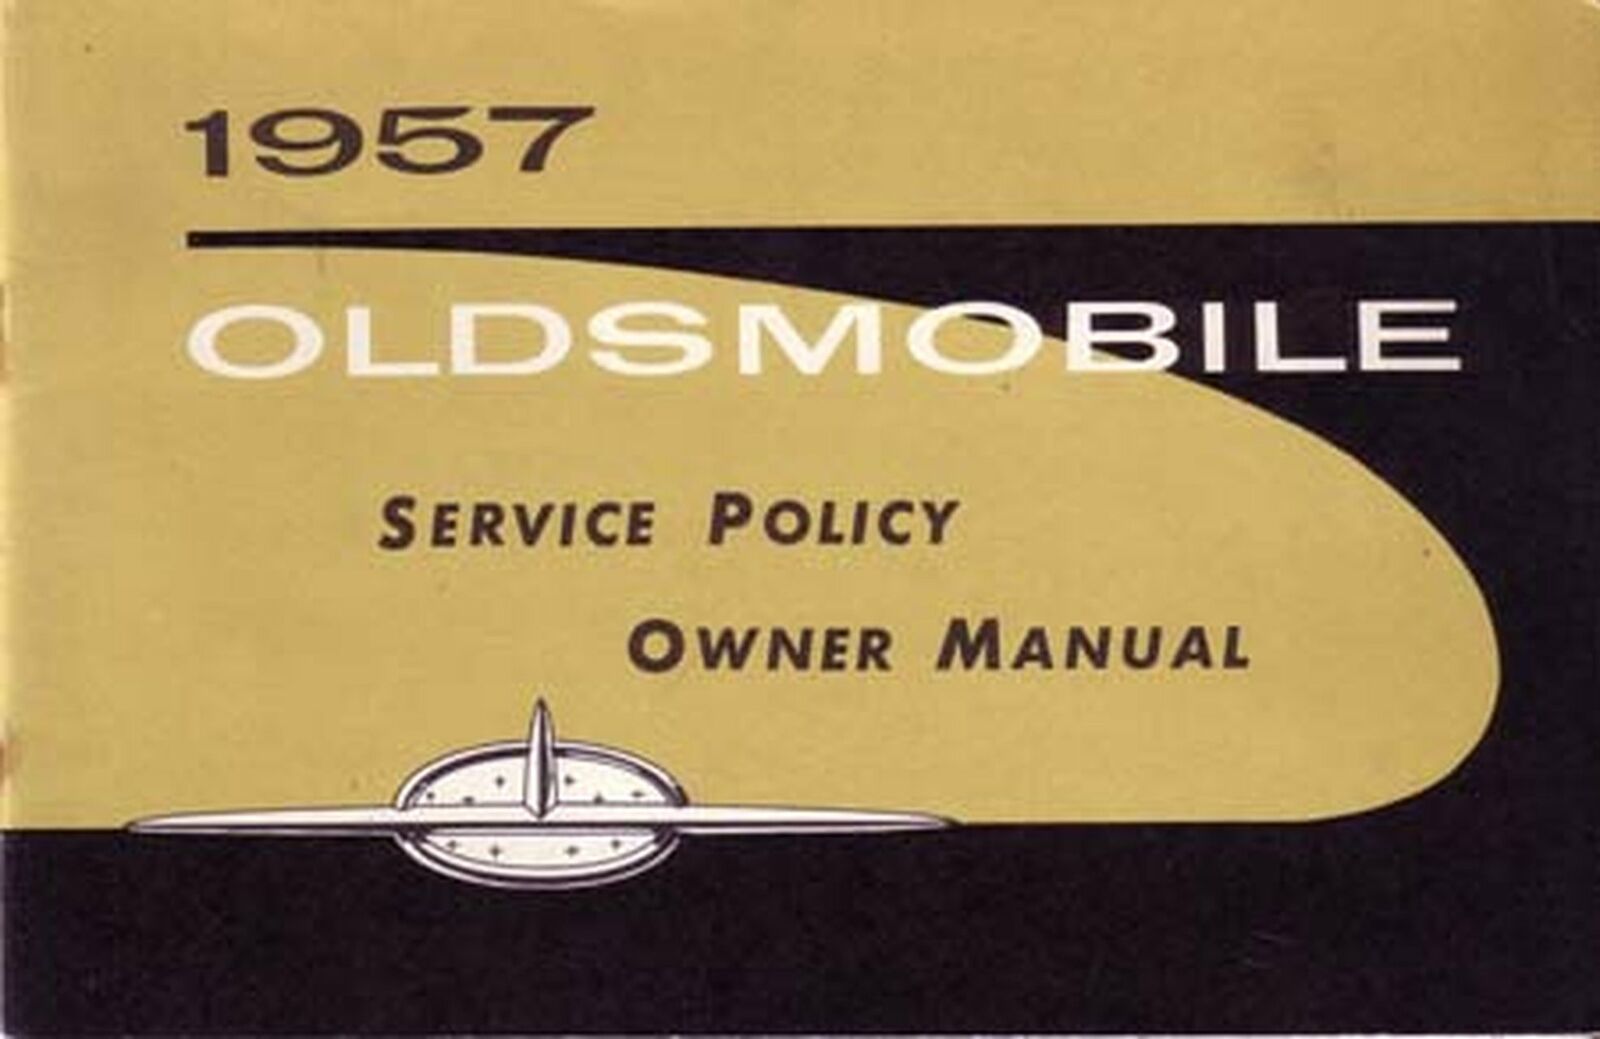 OEM Maintenance Ranking TOP10 Owner's Manual Bound 1 Models All Albuquerque Mall Oldsmobile for